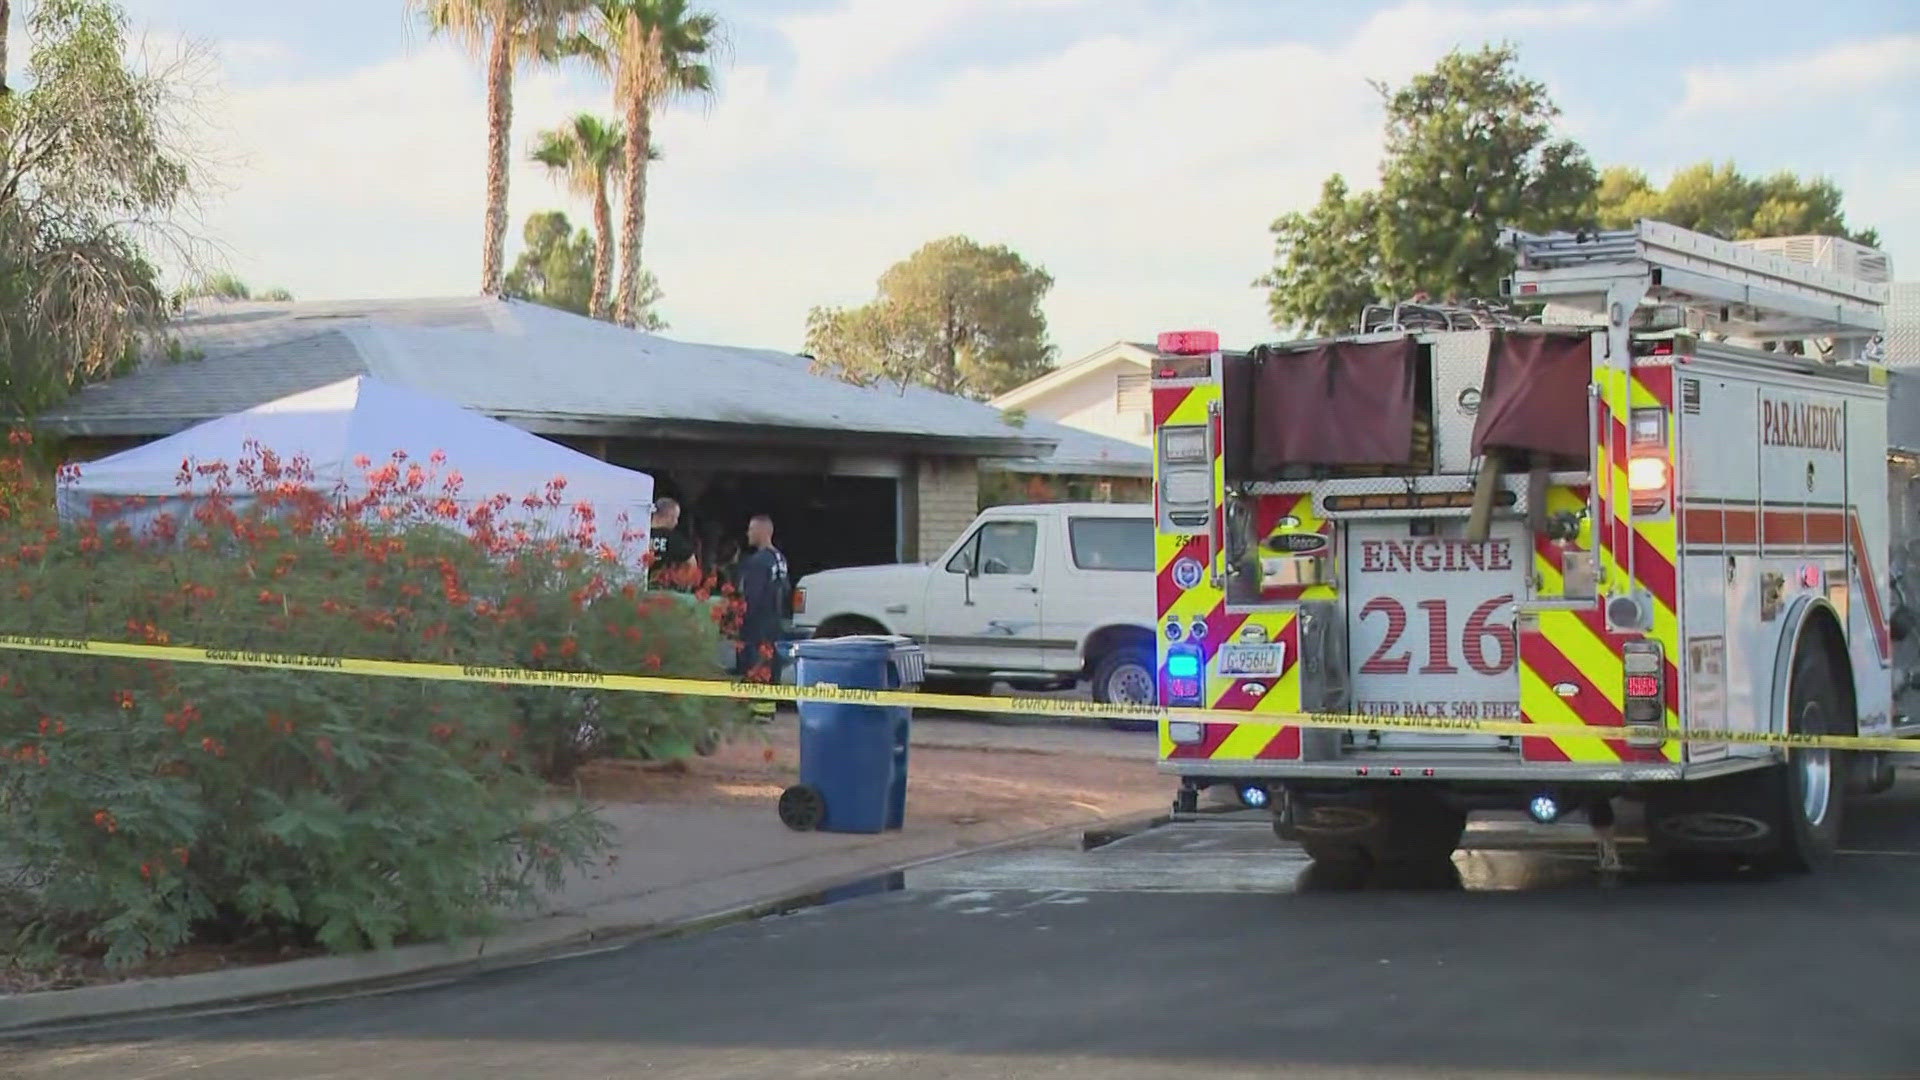 One person is dead after an early-morning house fire in Mesa, city police confirmed.